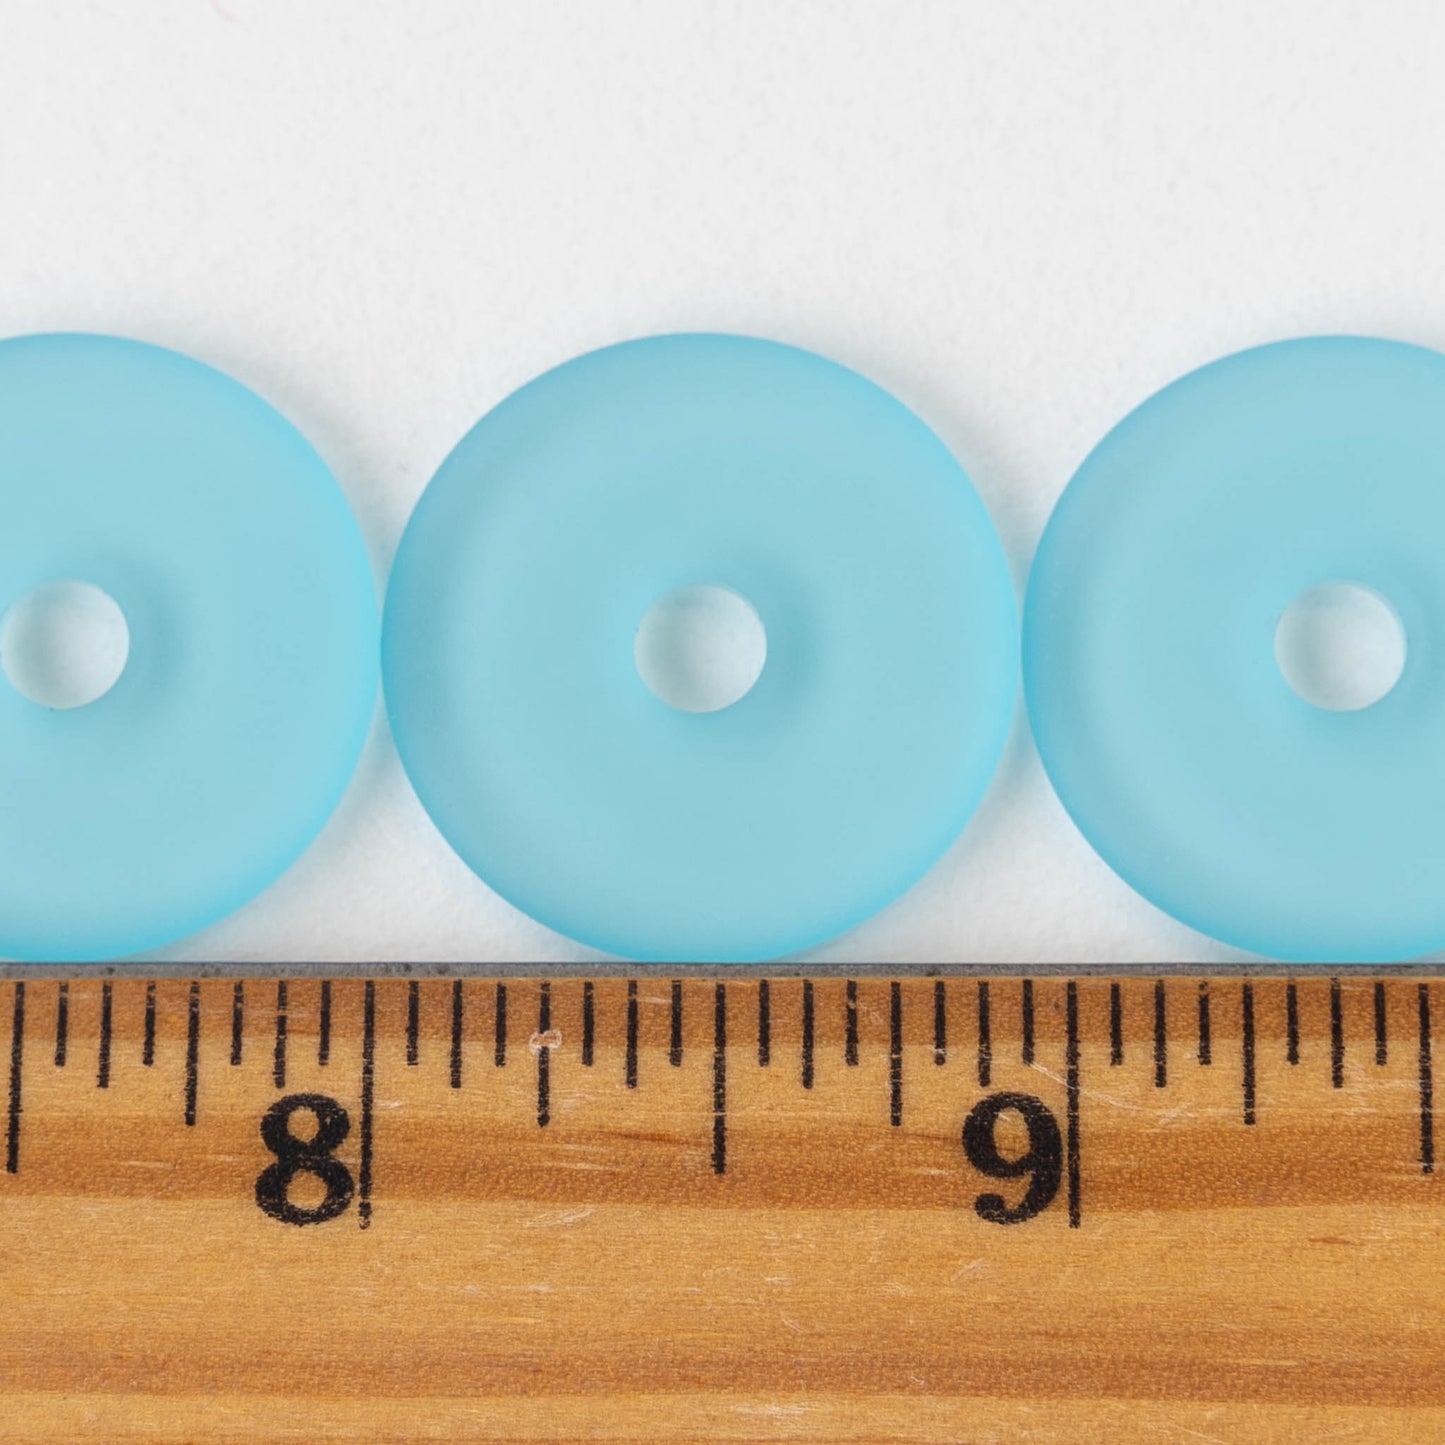 Load image into Gallery viewer, 25mm Frosted Glass Donut - Light Aqua Blue - 4 Beads
